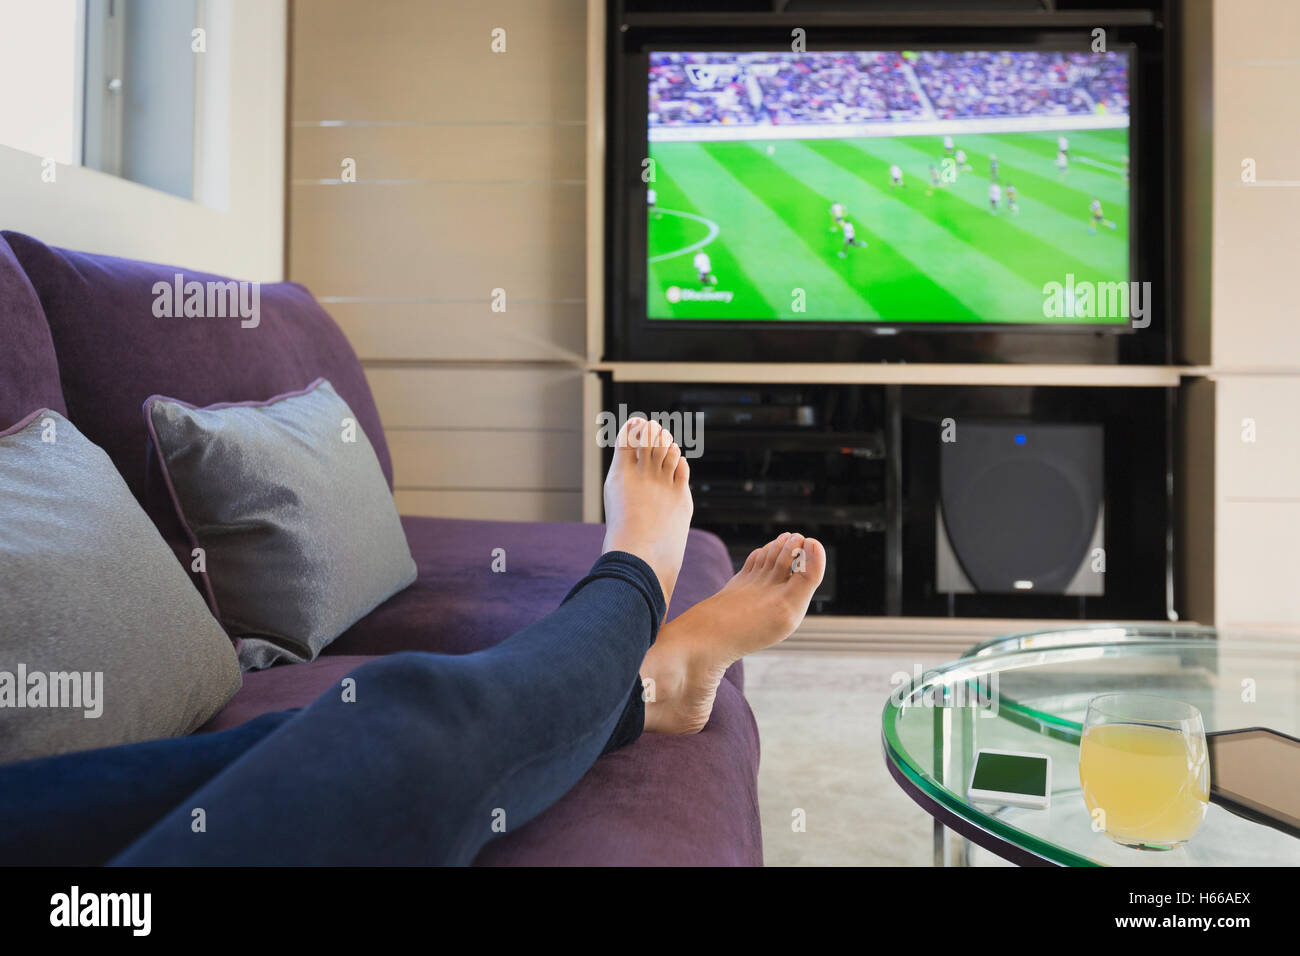 Personal Perspective Woman With Bare Feet Up Watching Soccer Game On Tv 